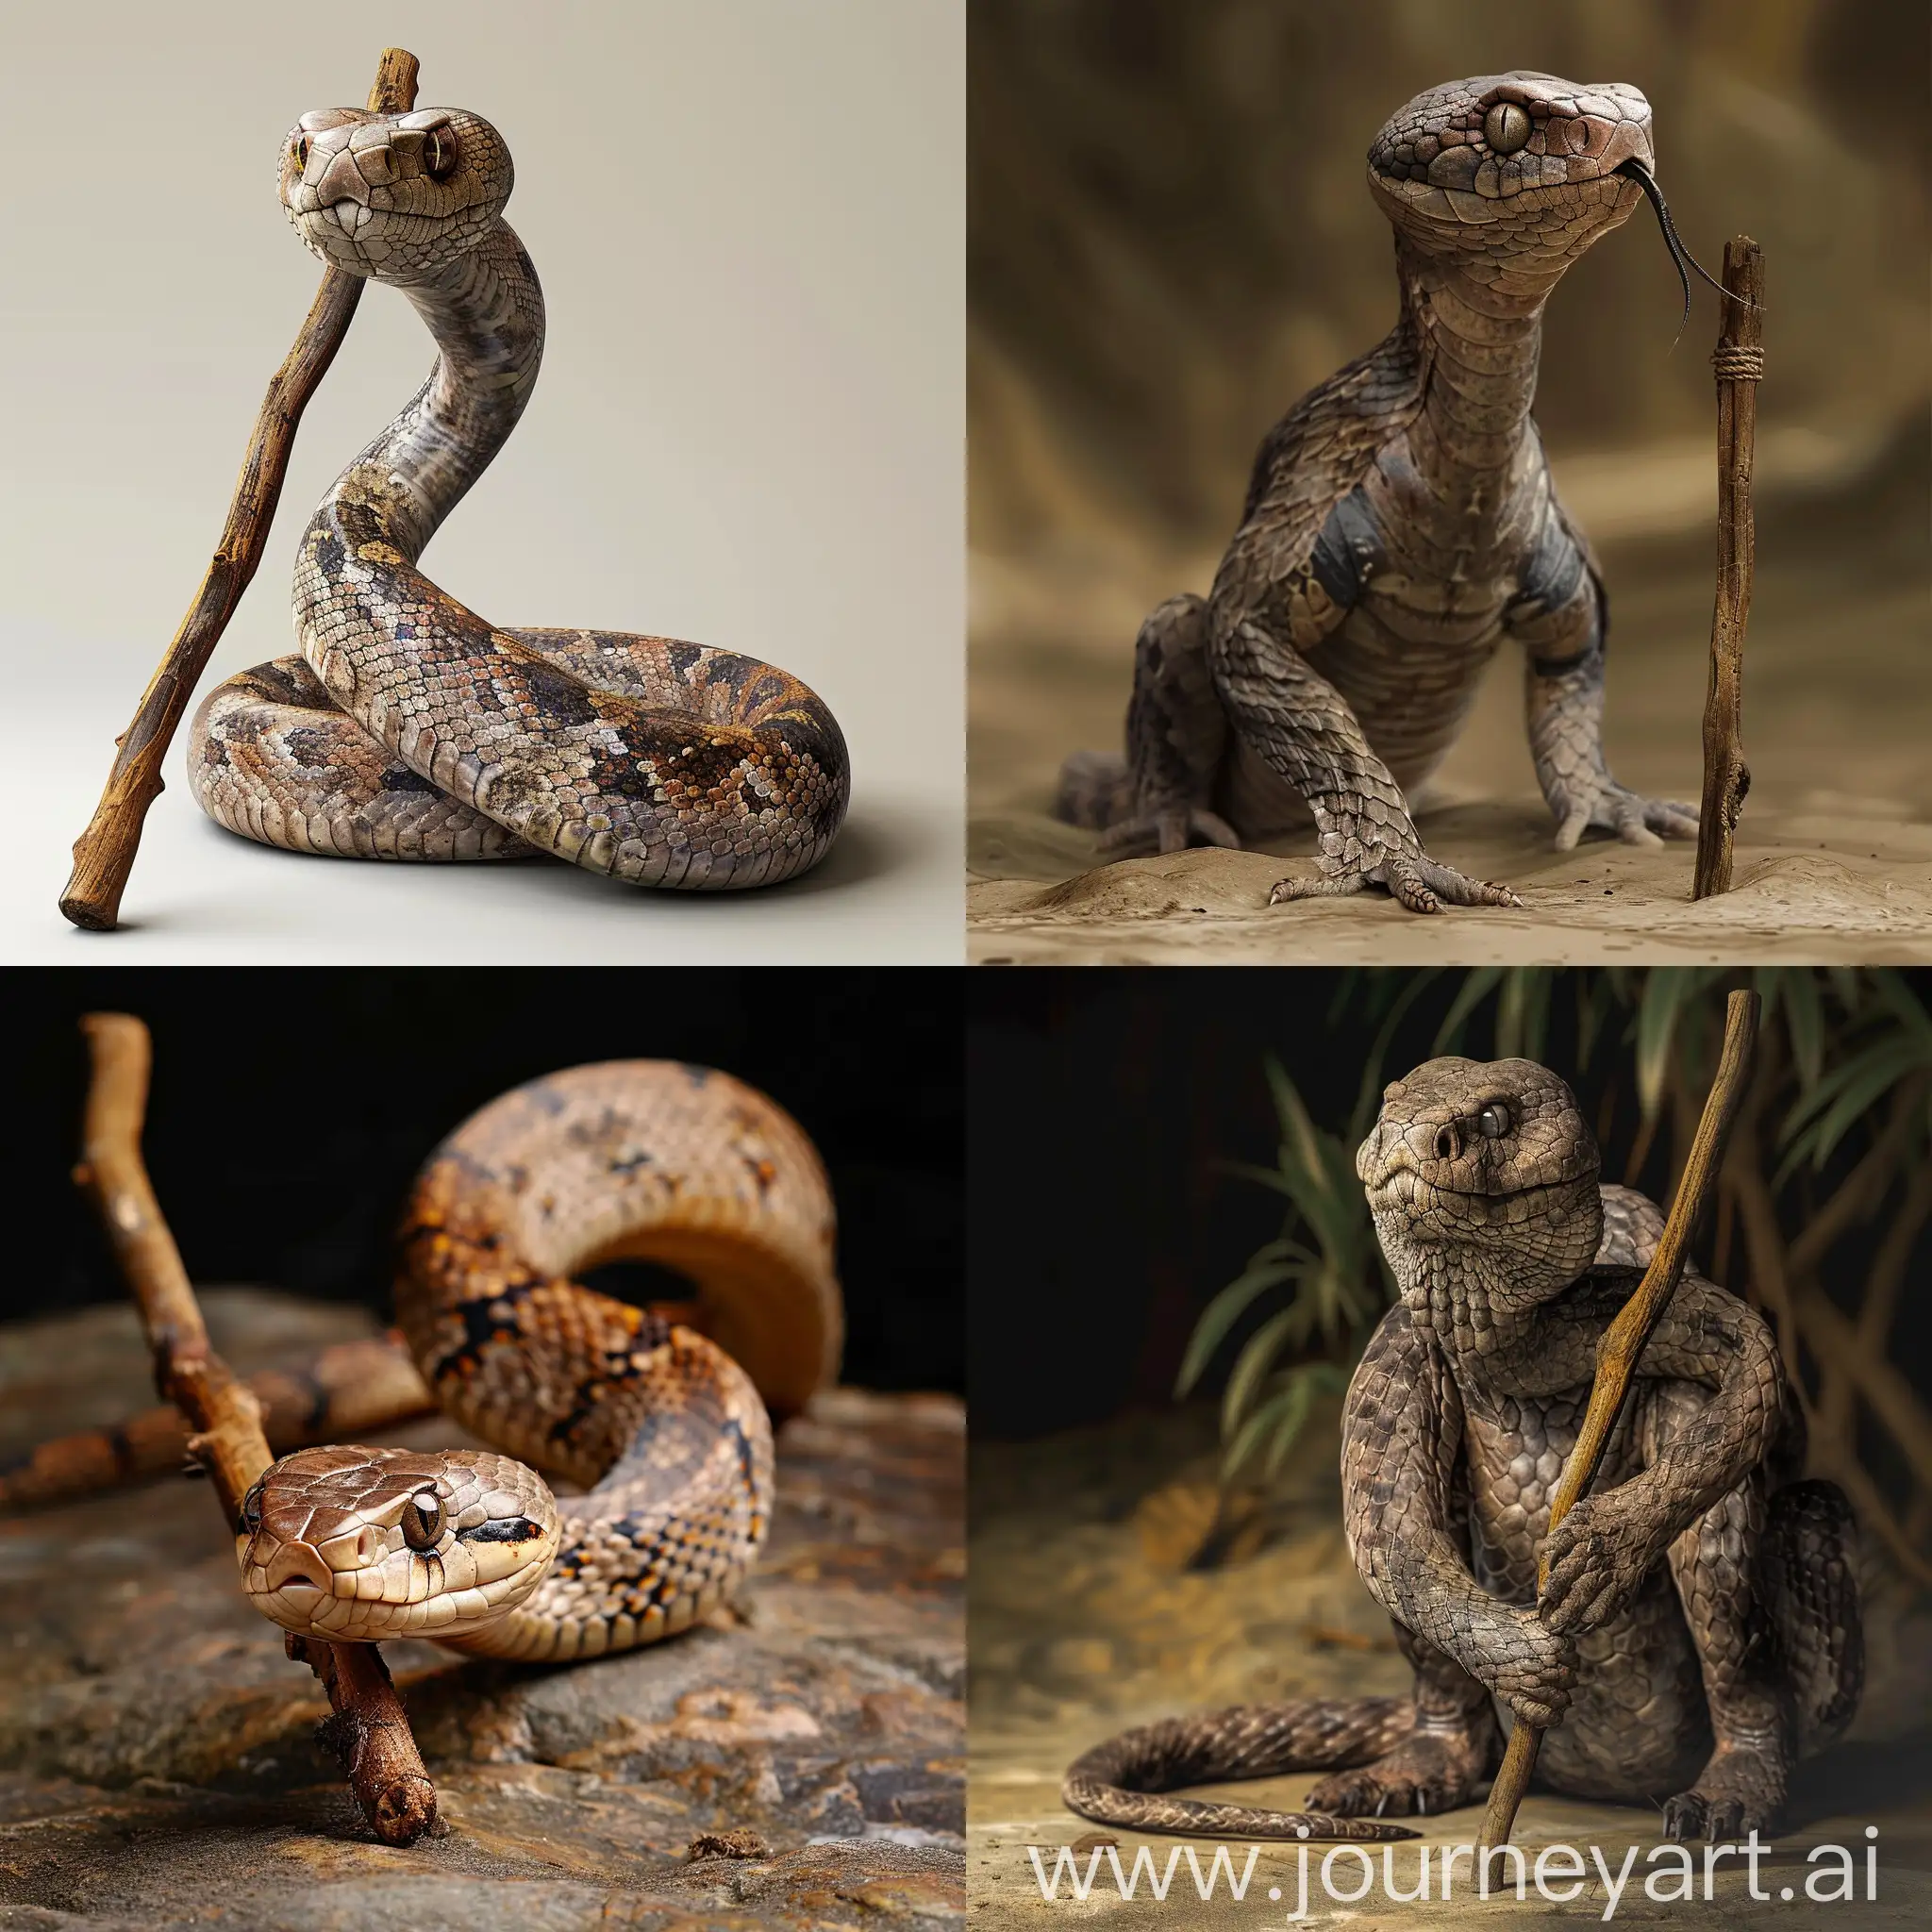 create an image of a old snake with a walking stick